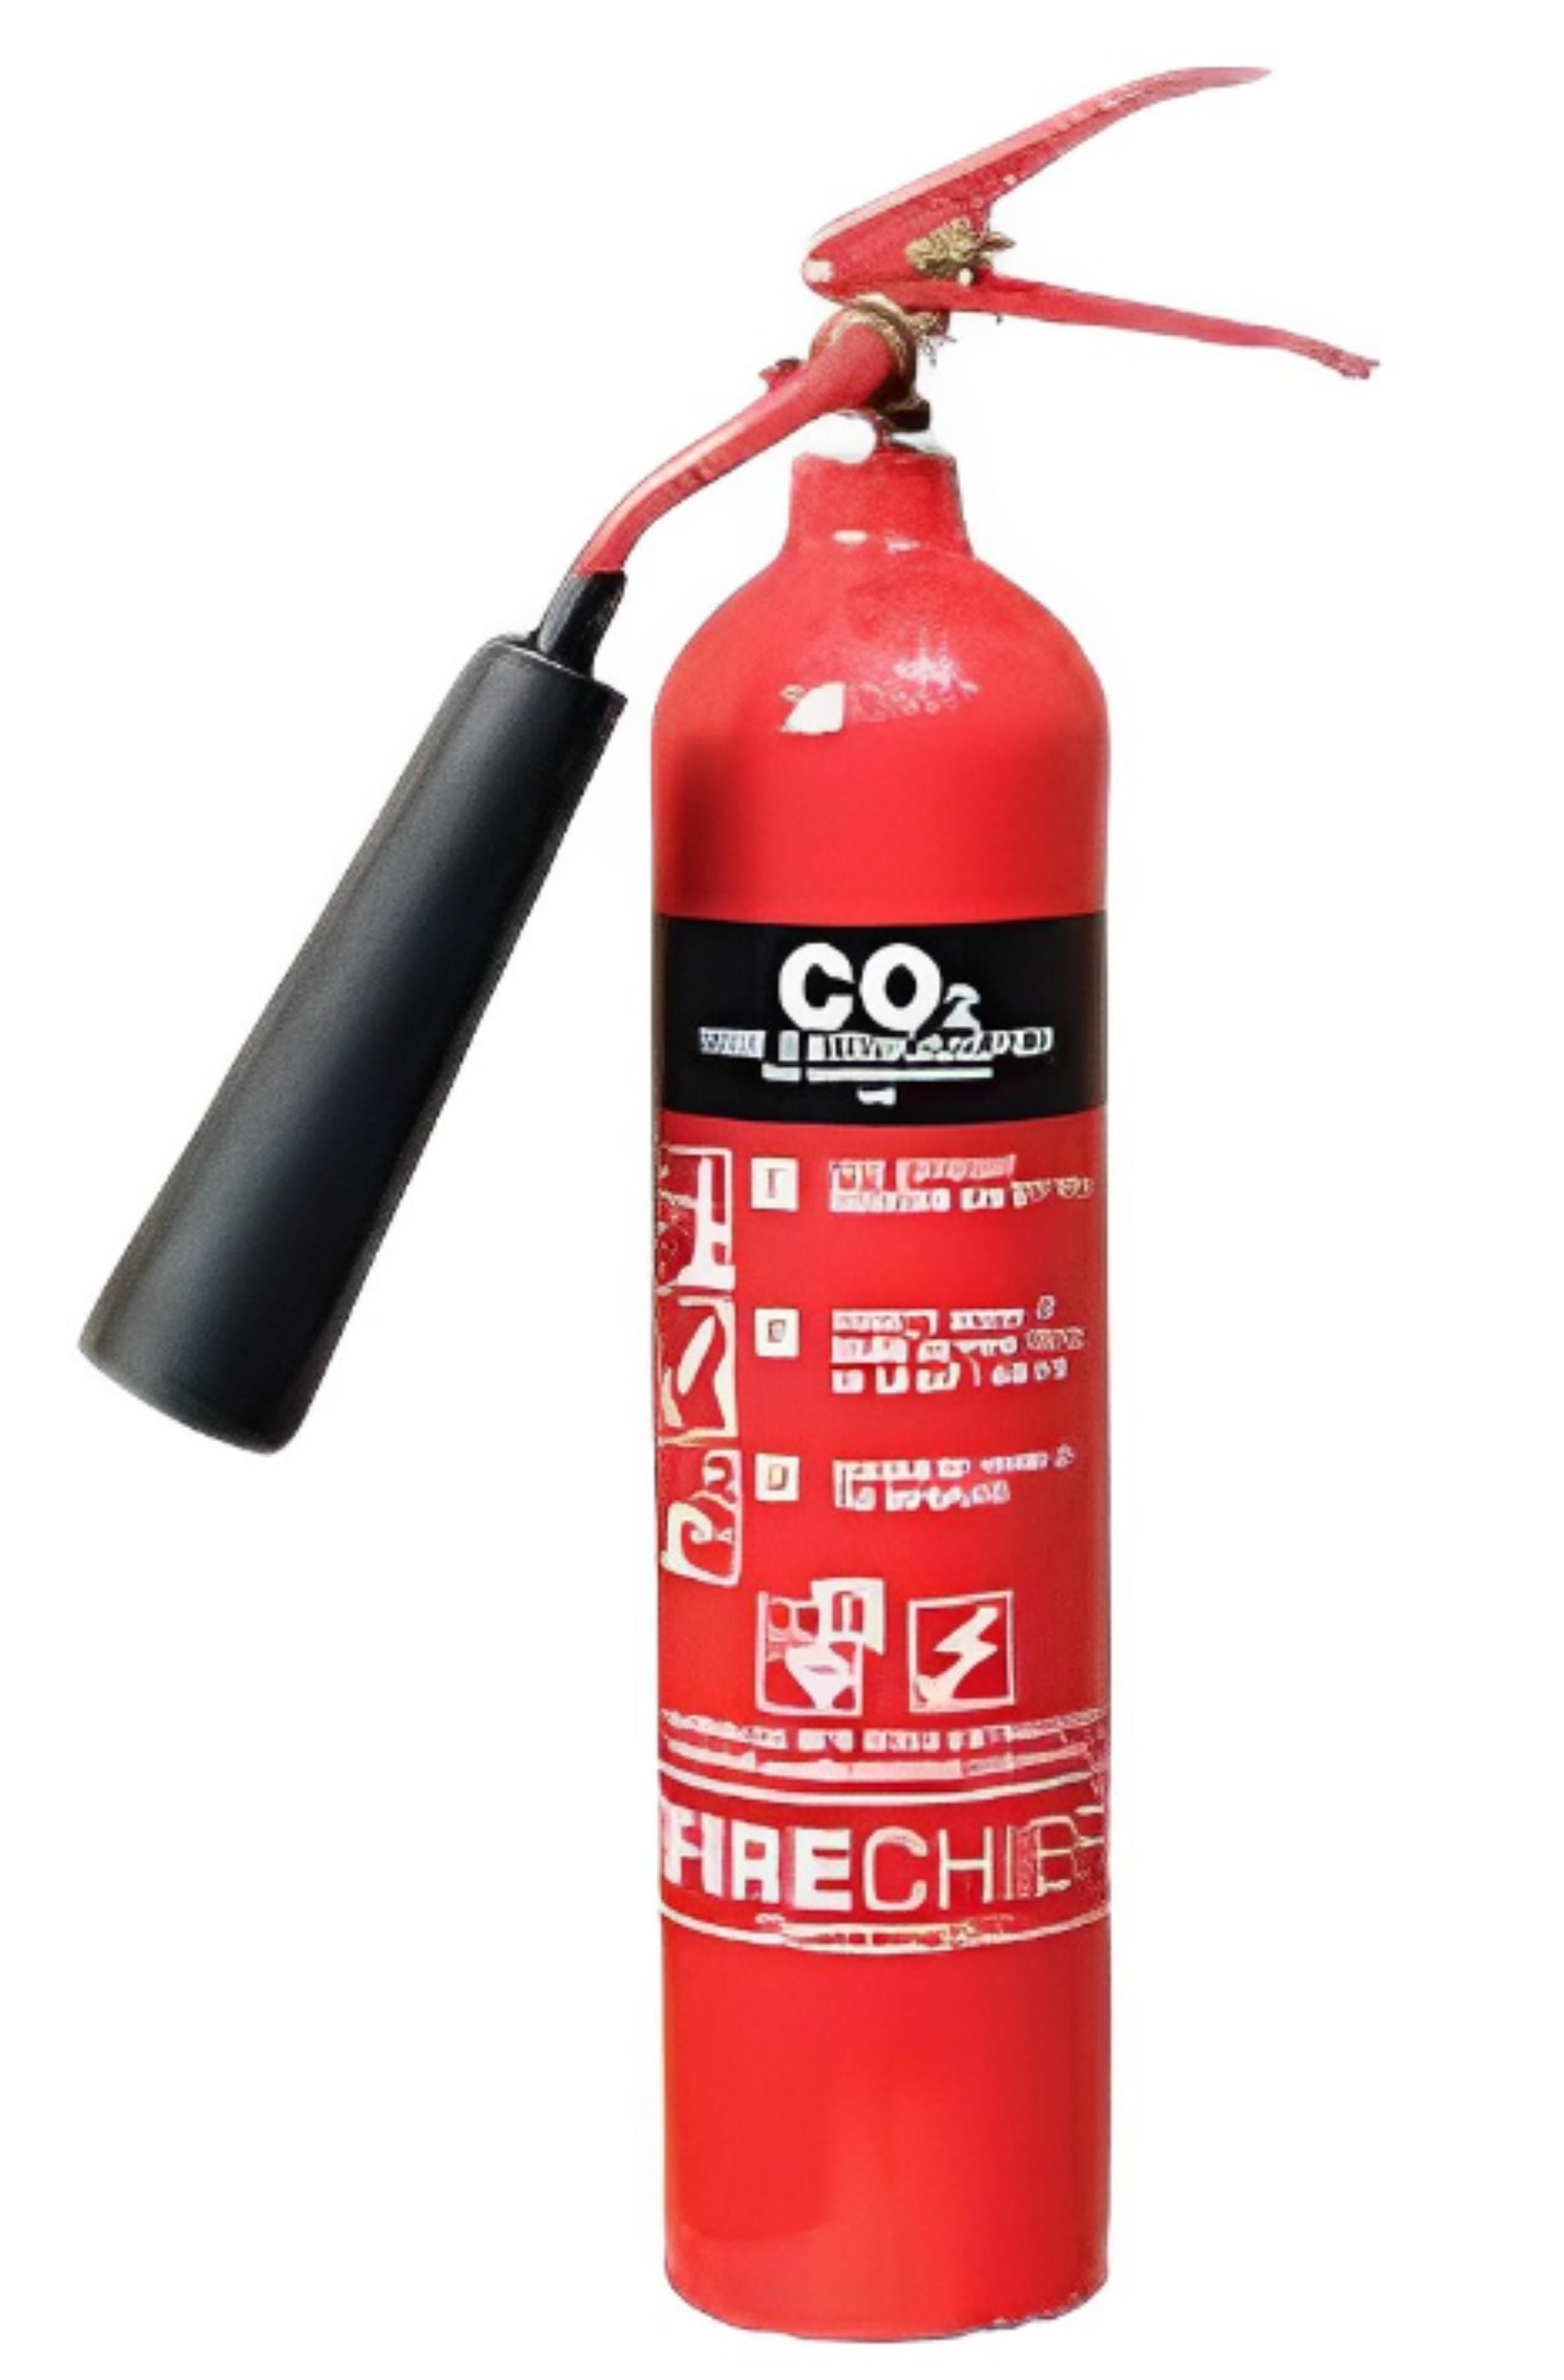 Buy 5 kg CO2 Fire Extinguishers online at best rates in India